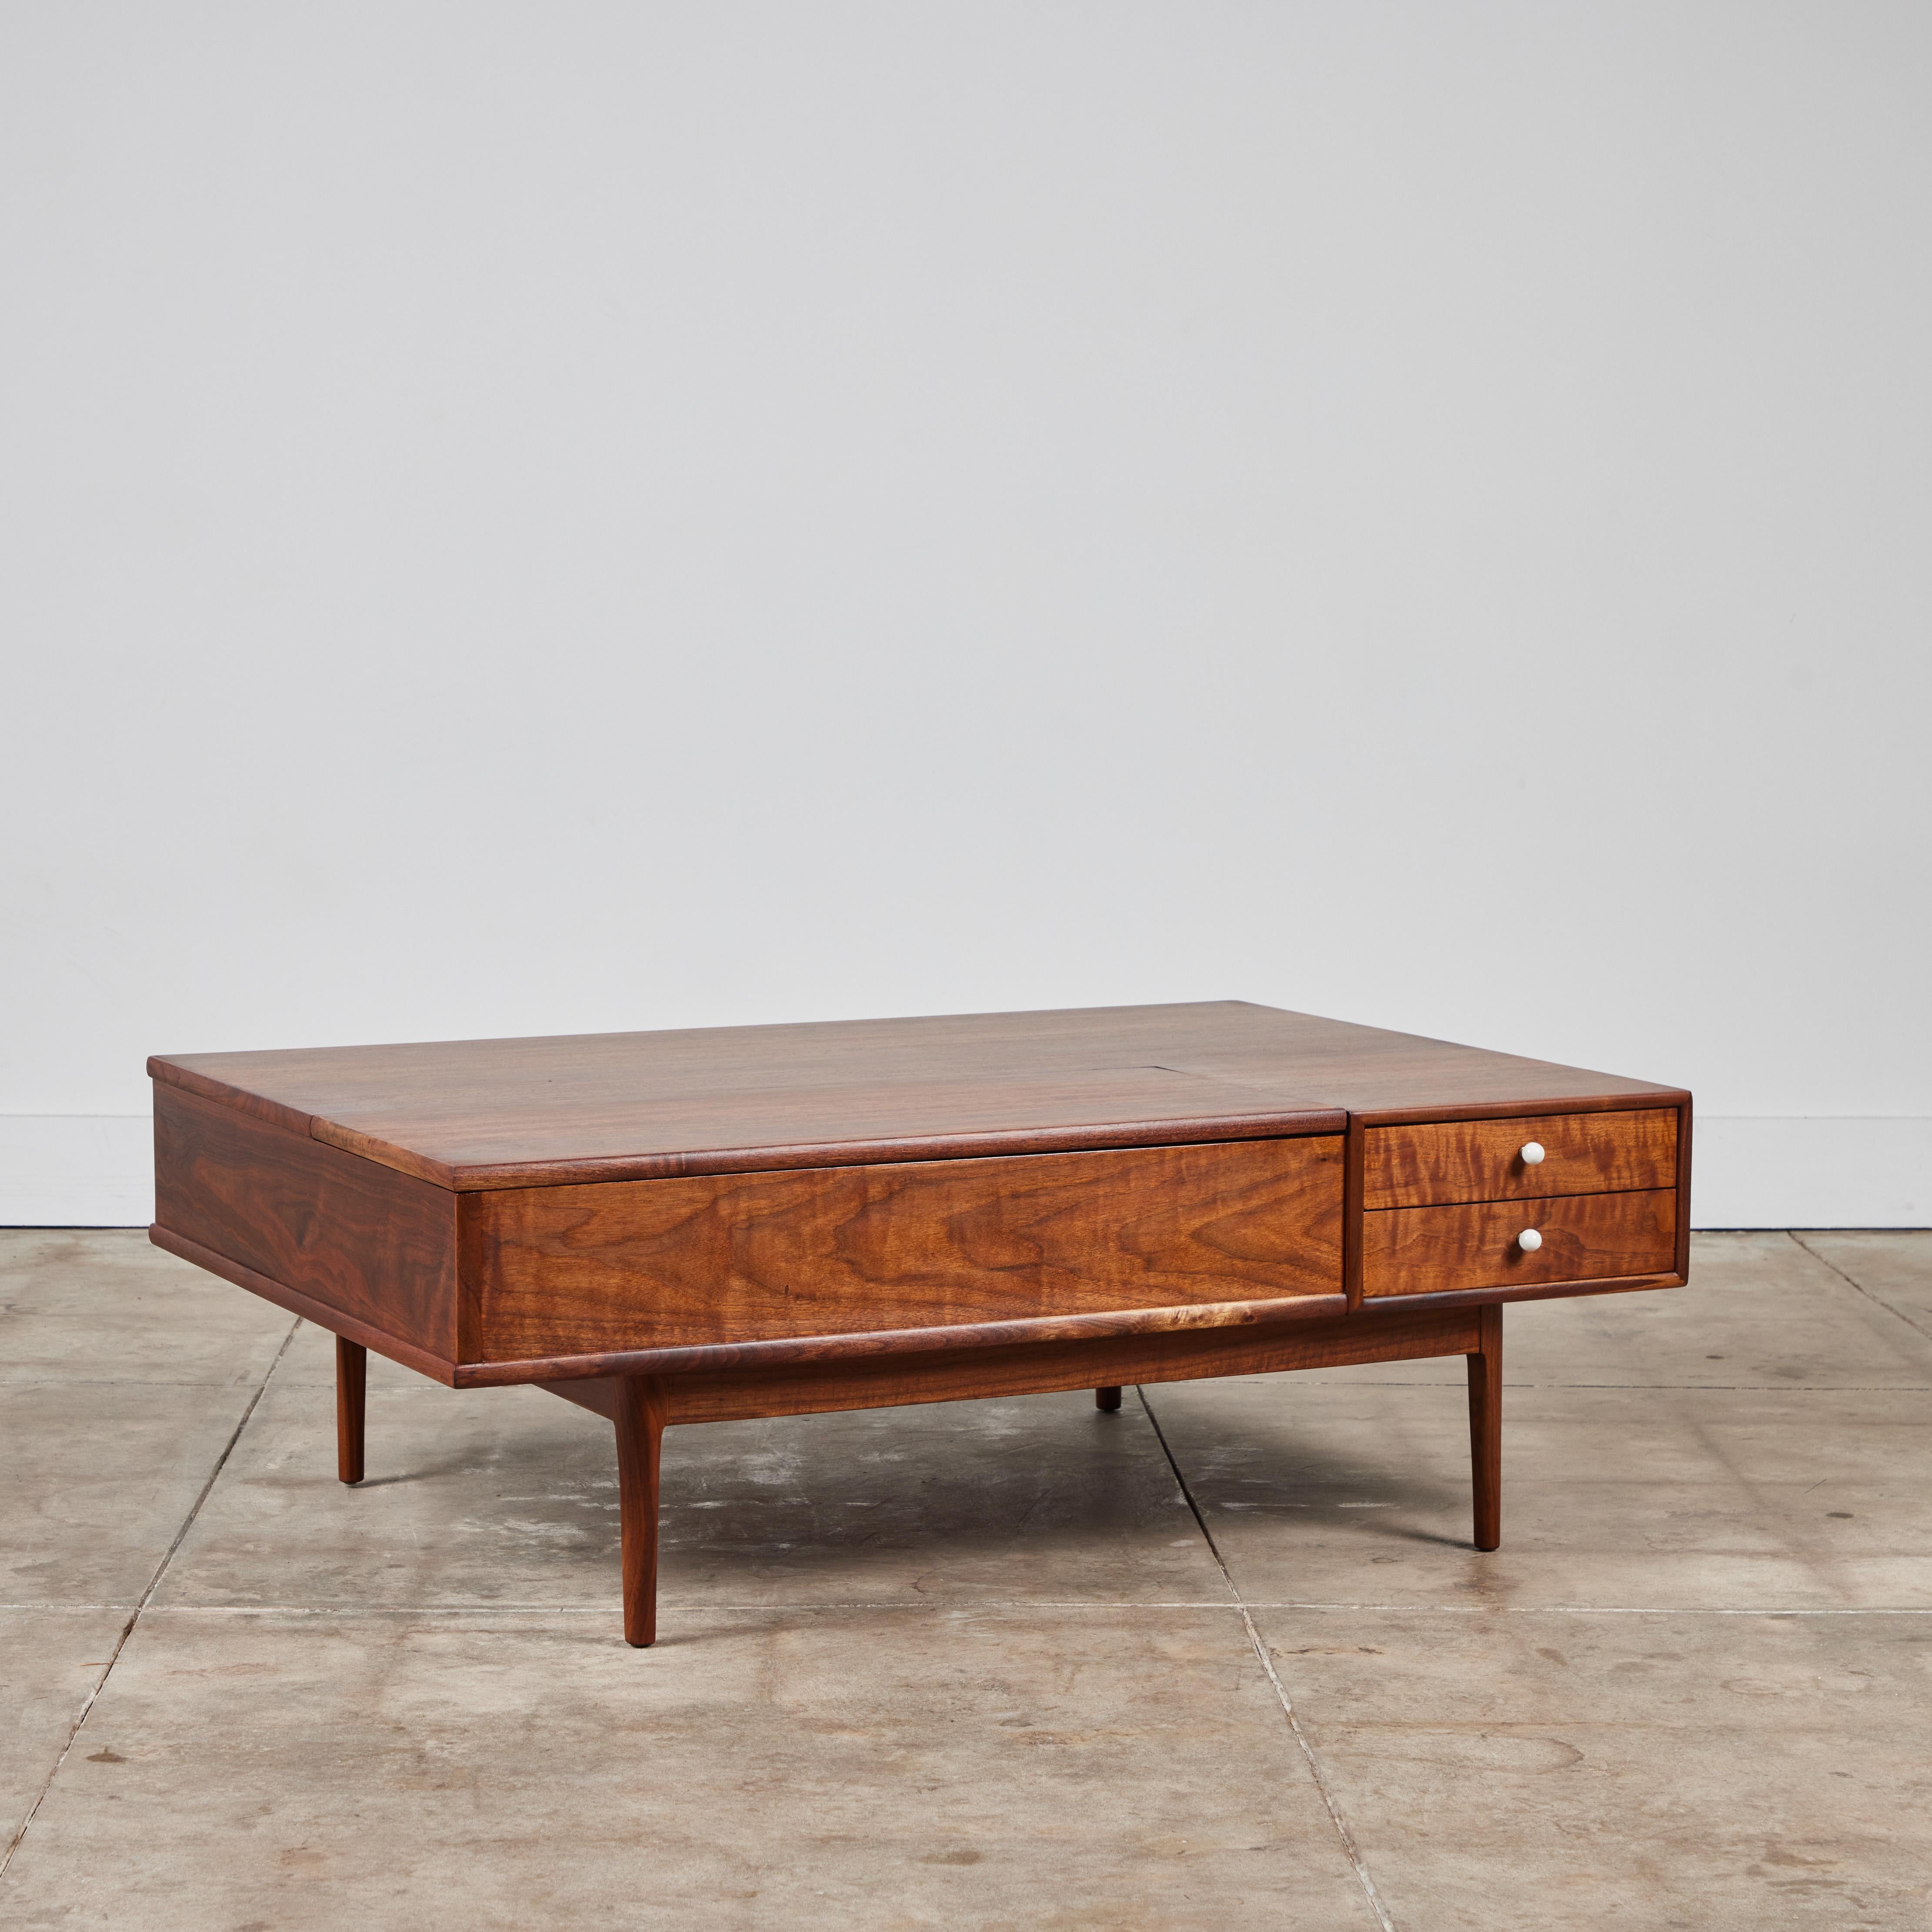 From the iconic Drexel Declaration collection by Kipp Stewart and Stewart MacDougall, this is a deep, rectangular table in walnut wood on recessed legs. Two drawers with signature porcelain drawer pulls sit in the right front corner, and a panel